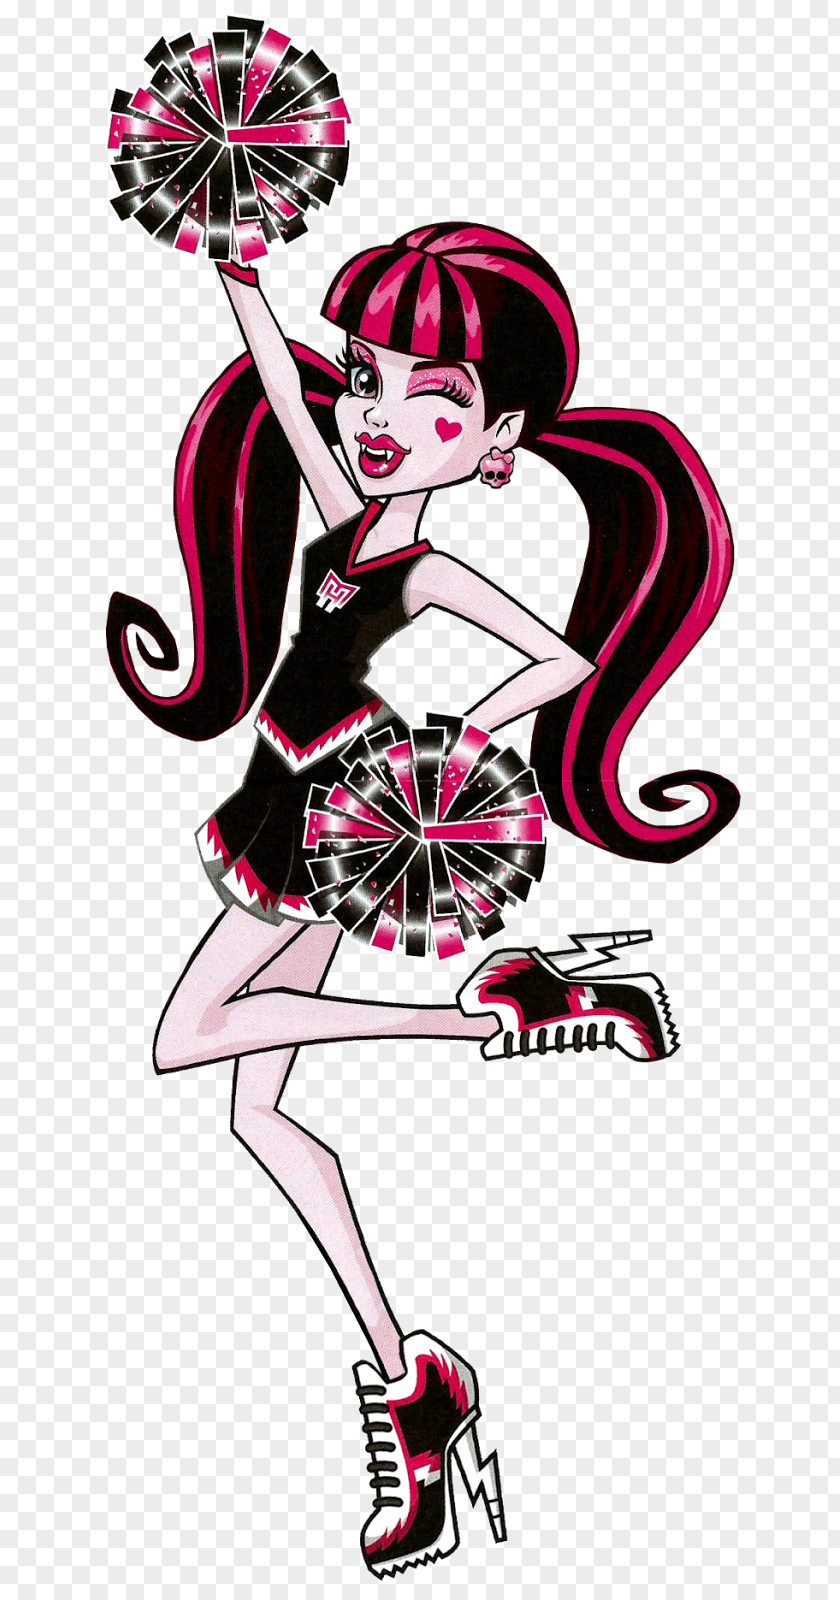 Doll Draculaura Monster High Clawdeen Wolf Barbie PNG